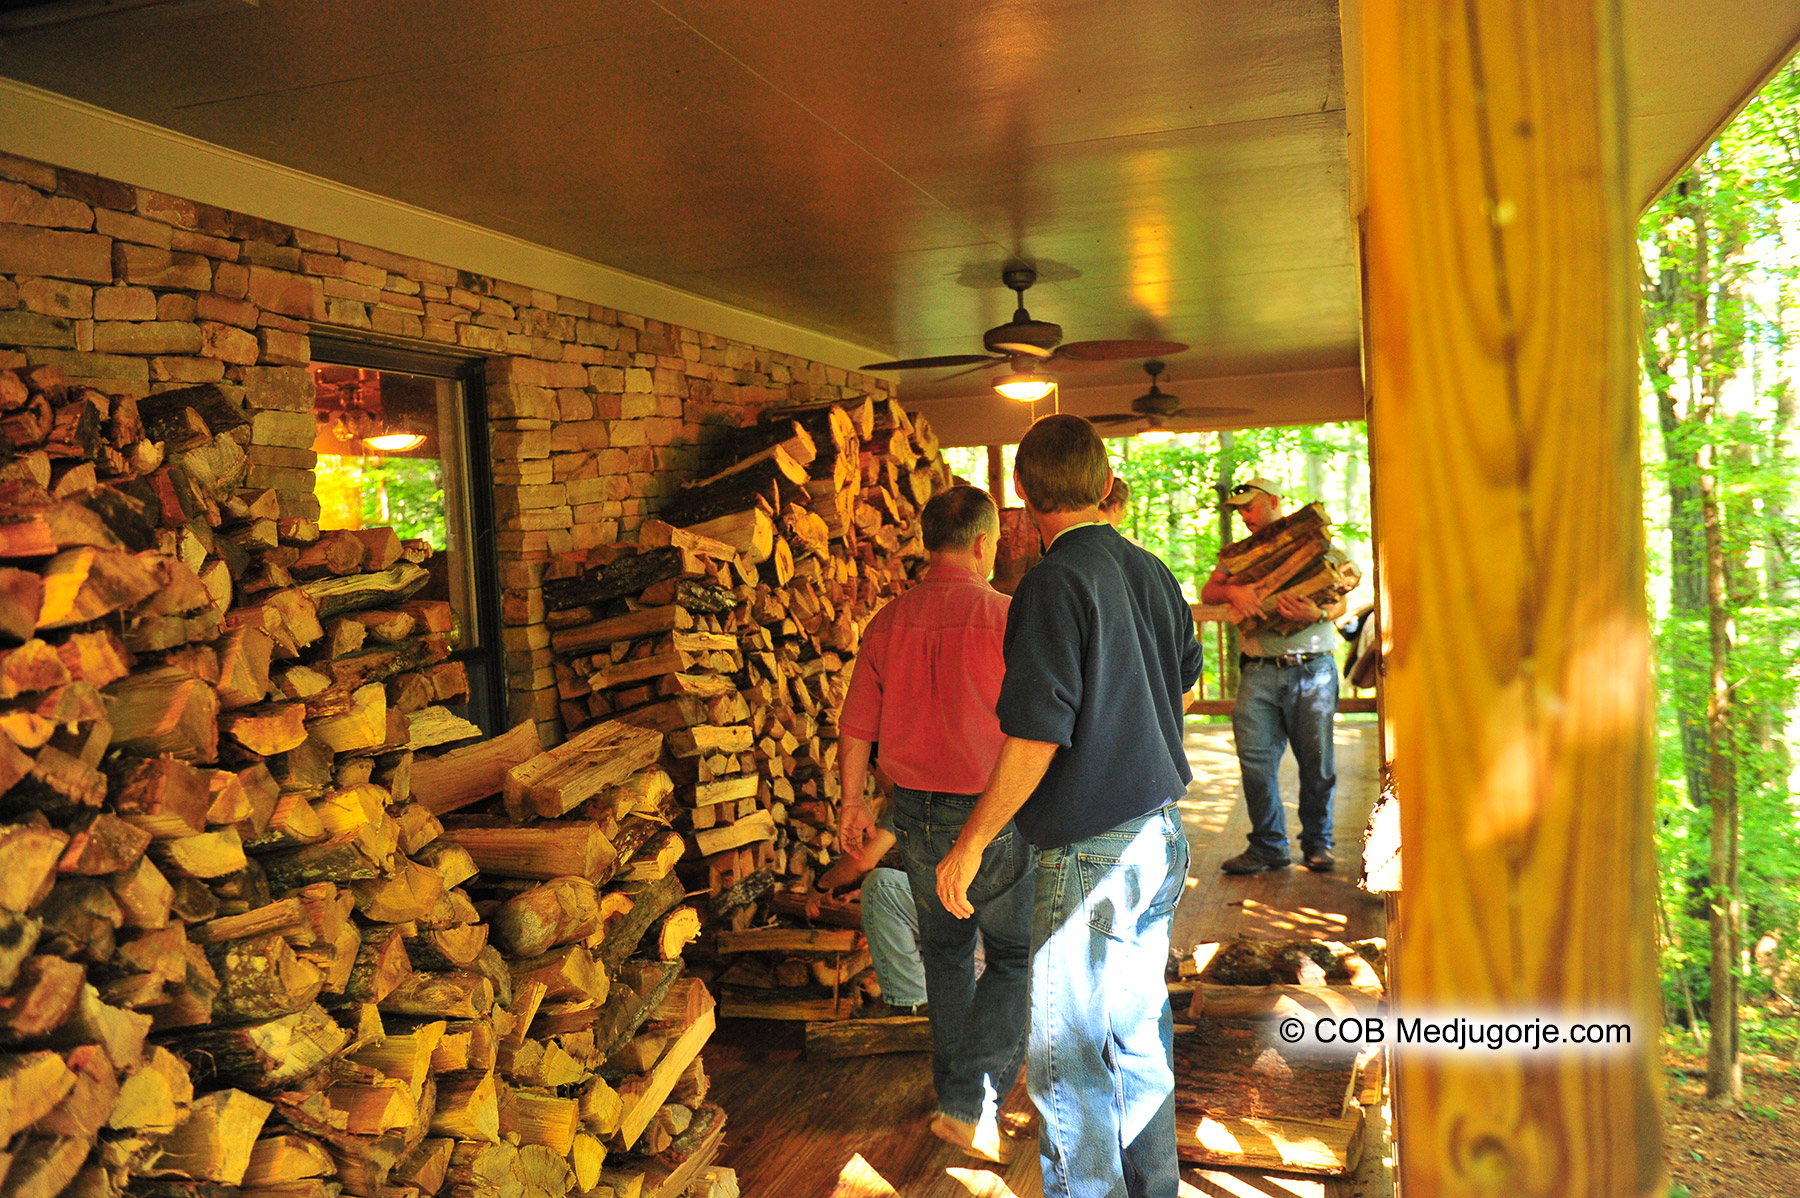 Community of Caritas stacking firewood